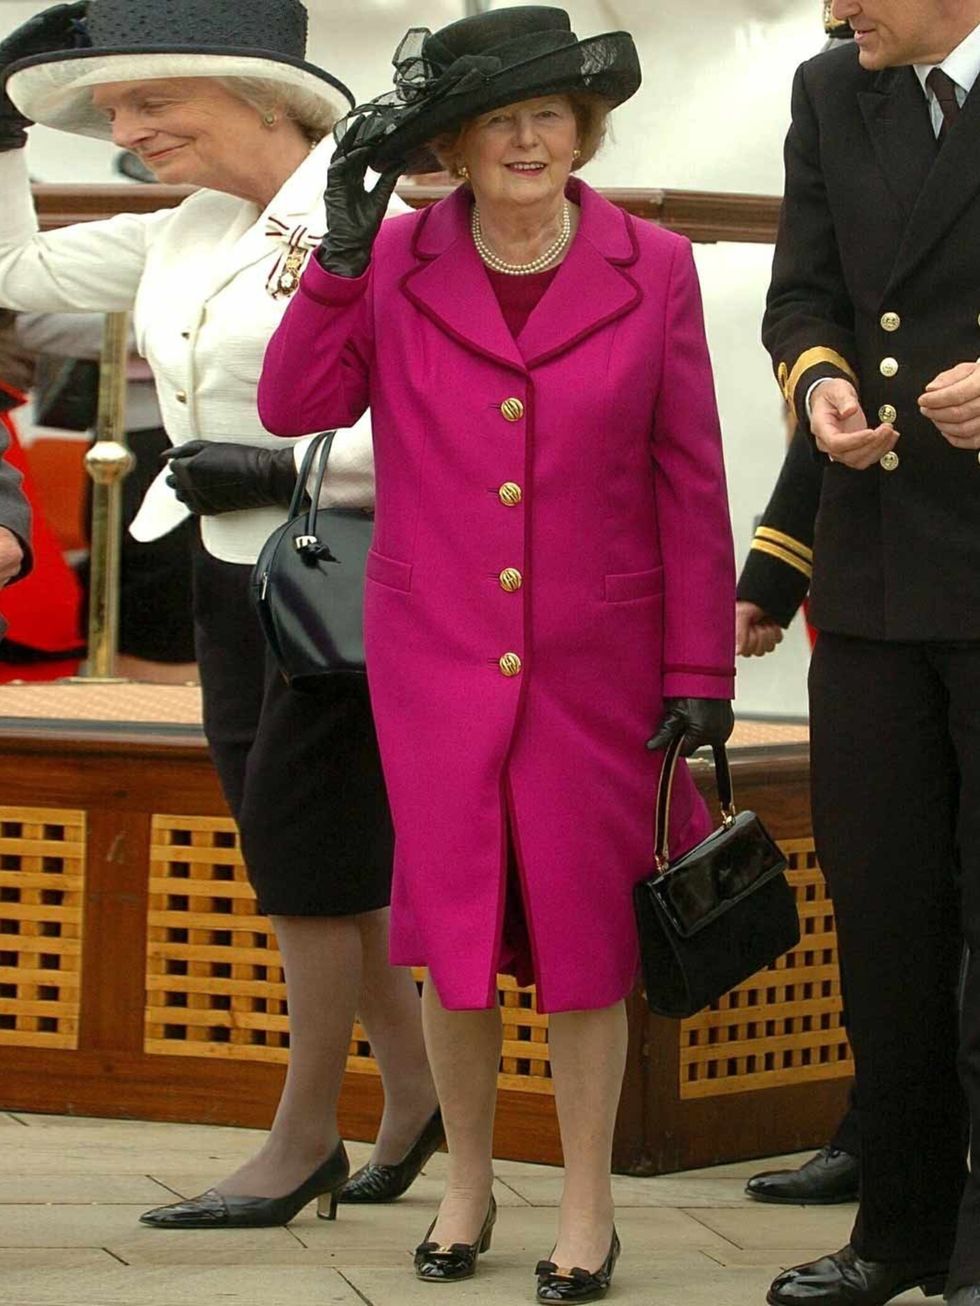 <p>Margaret Thatcher unveiling a memorial archway to mark the 25th anniversary of the end of the Falklands War, 12 May 2007.</p>